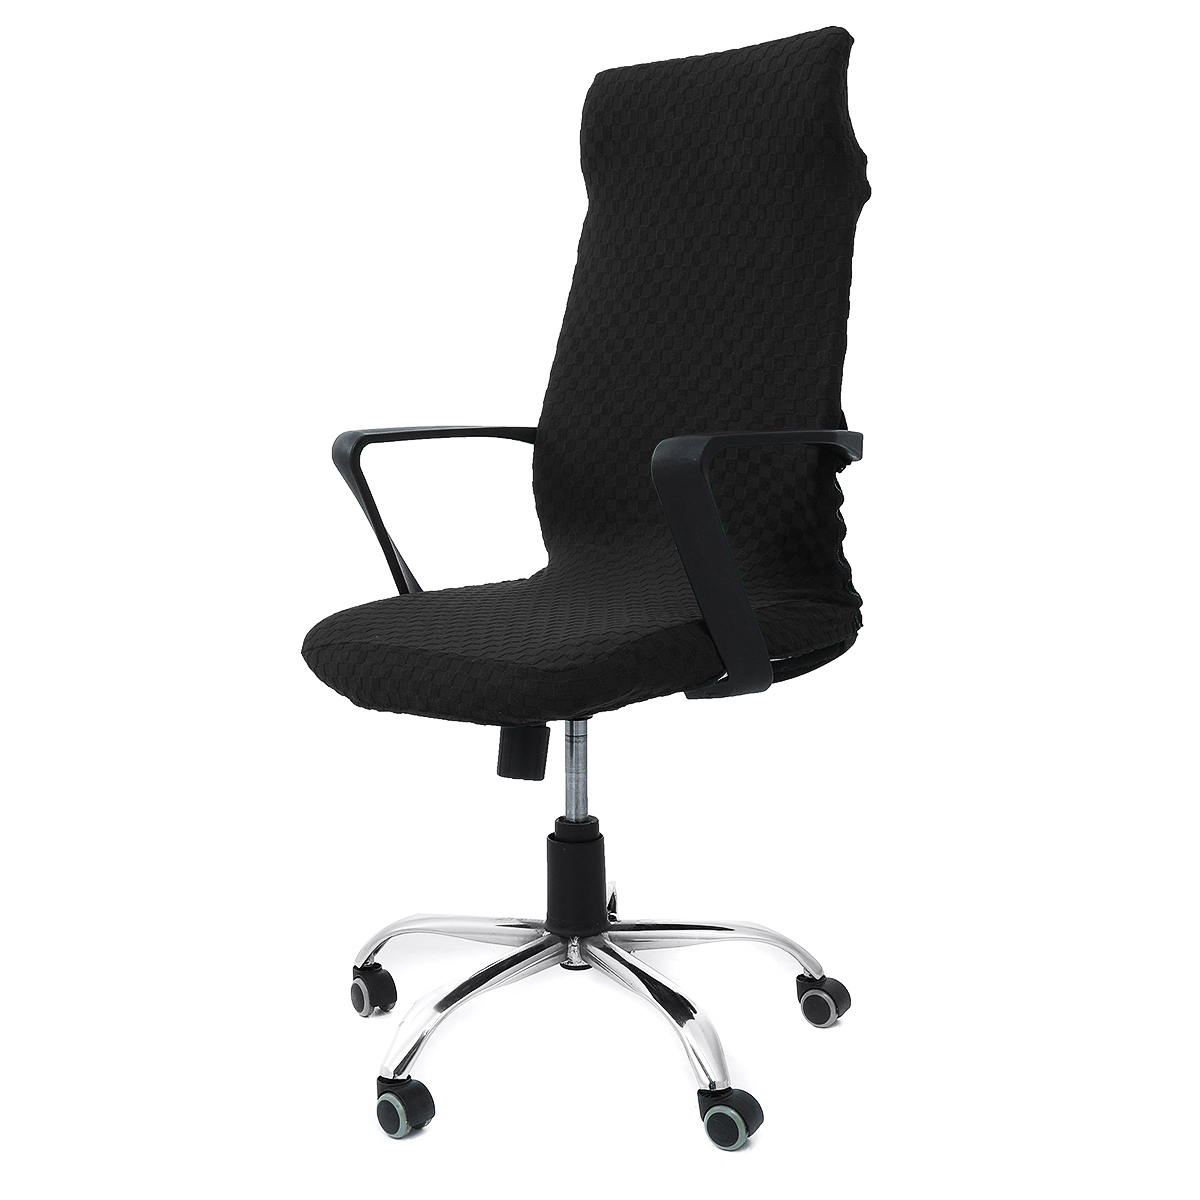 45-56cm Office Chair Cover Removable Stretch Chair Protector Rotating Armchair Seat Slipcover for Home Office Chair Decoration